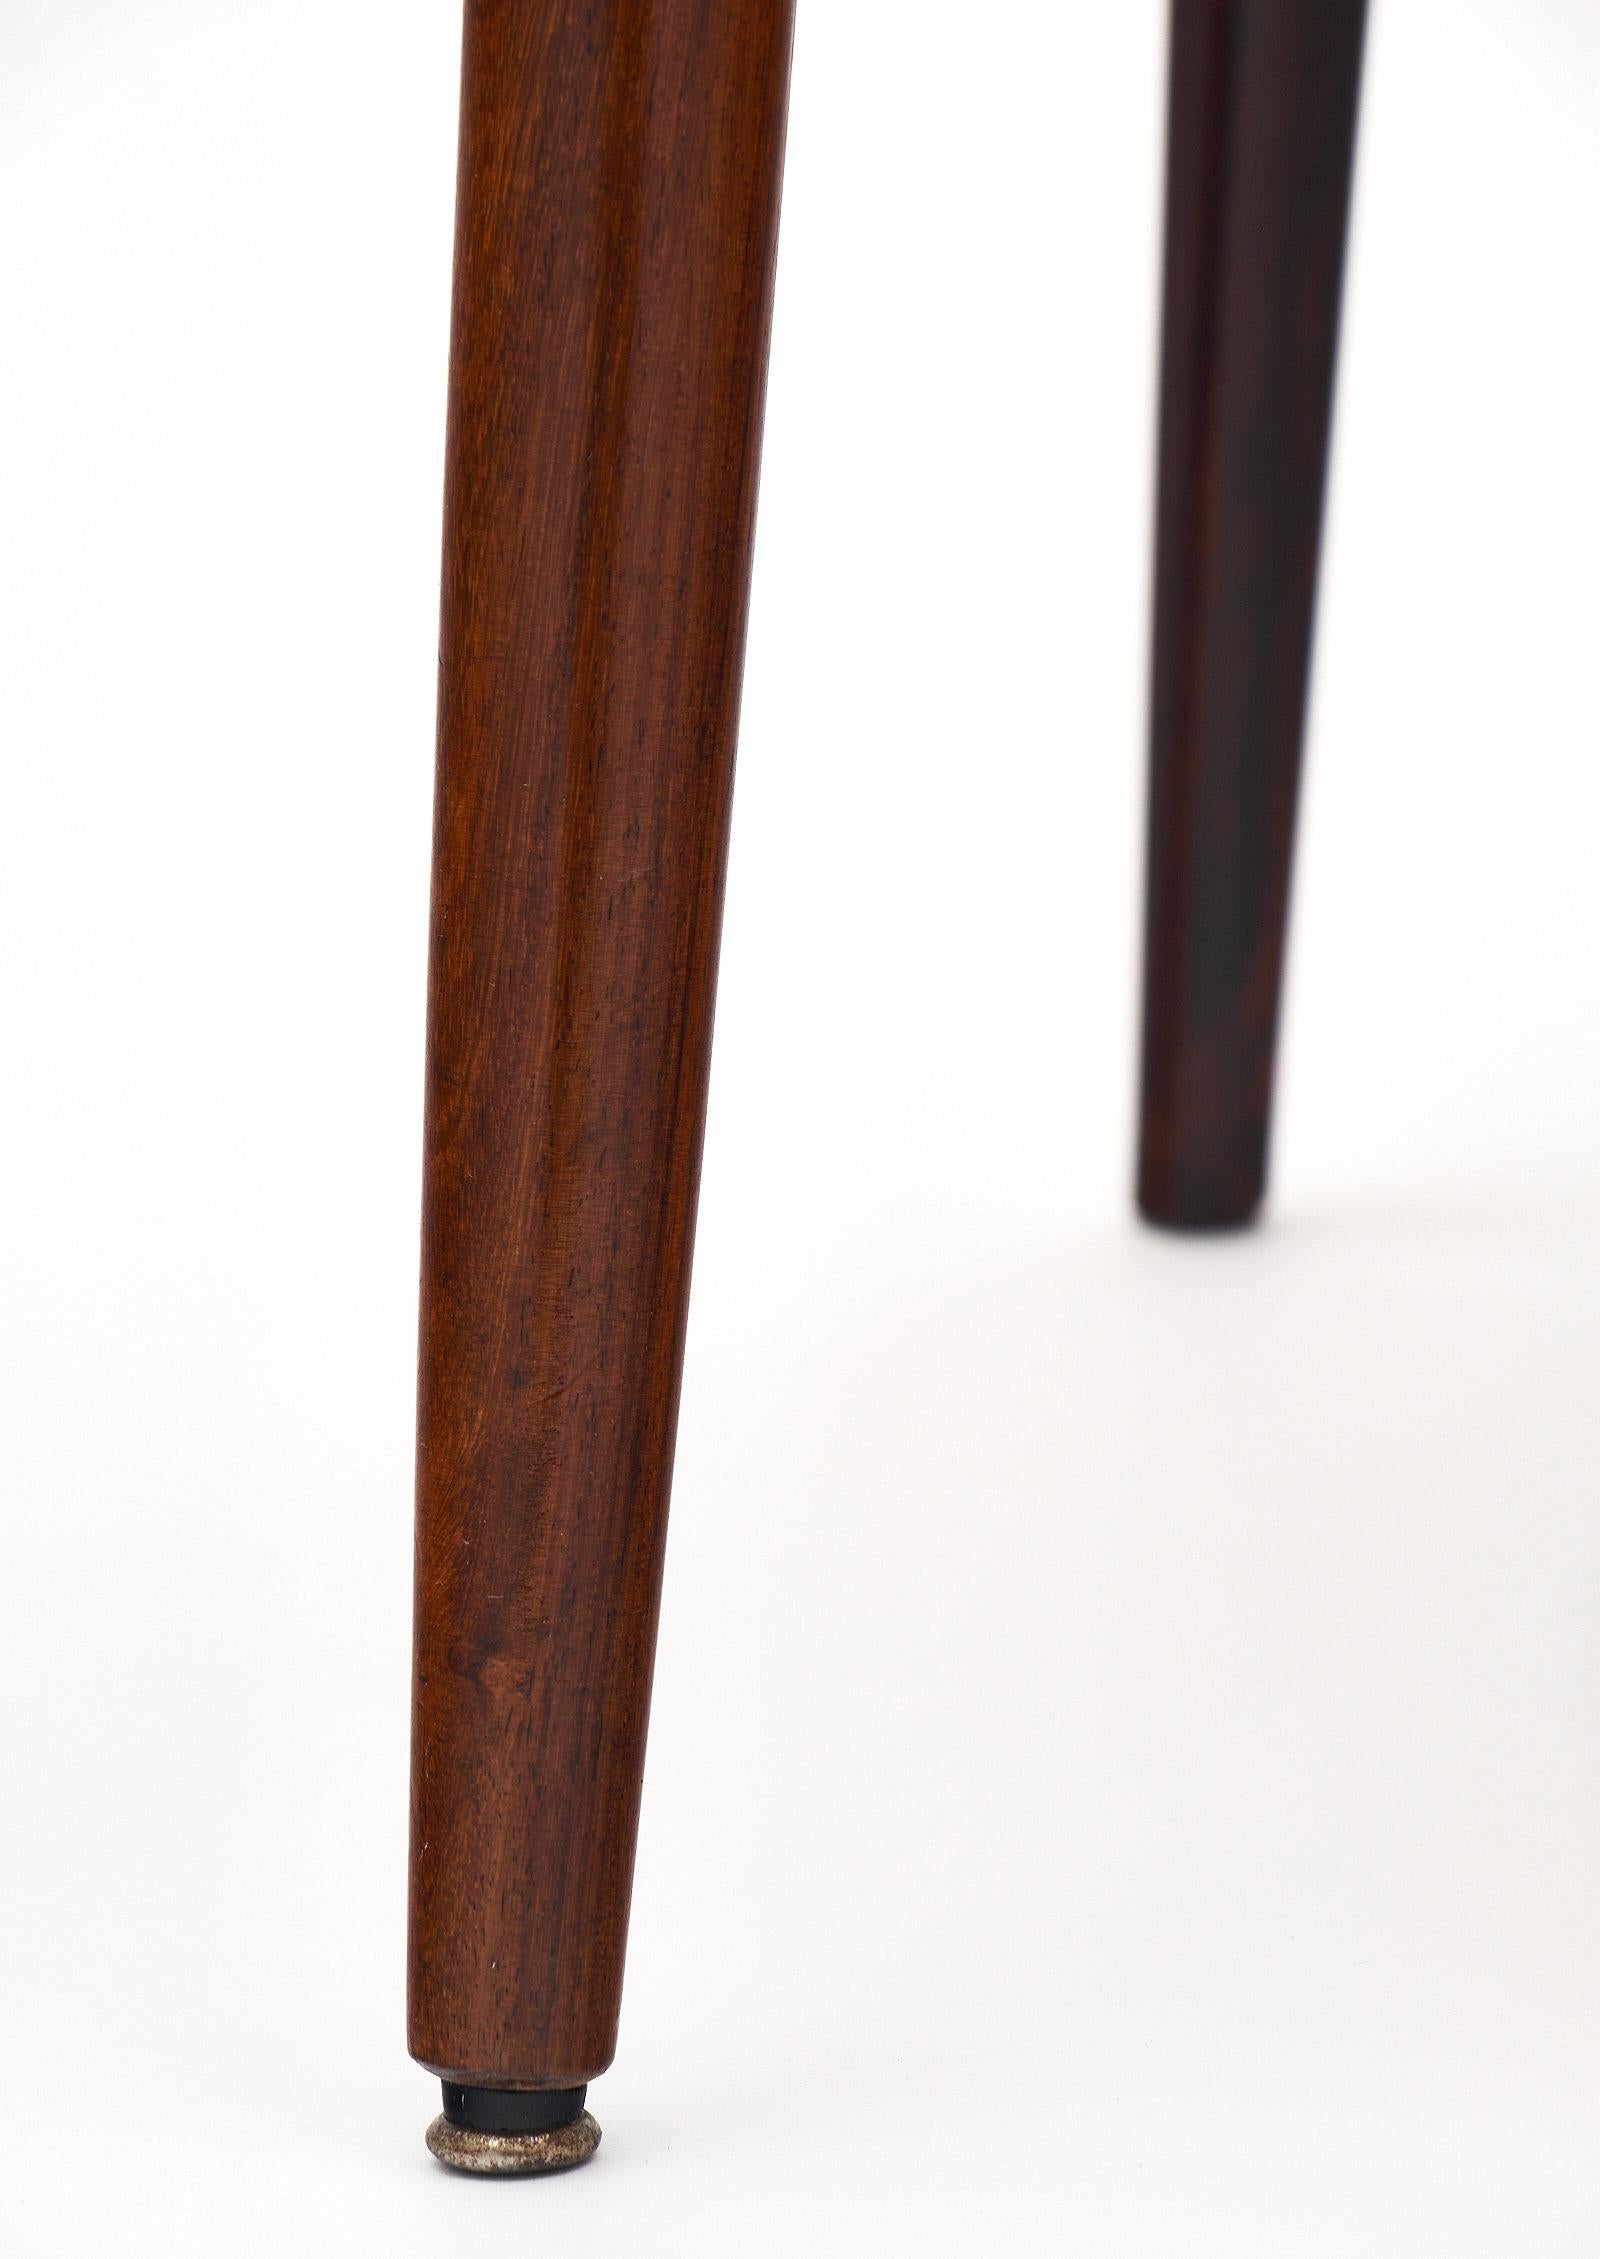 Danish “Ingrid” Dining Chairs by Koefoeds Hornslet 2